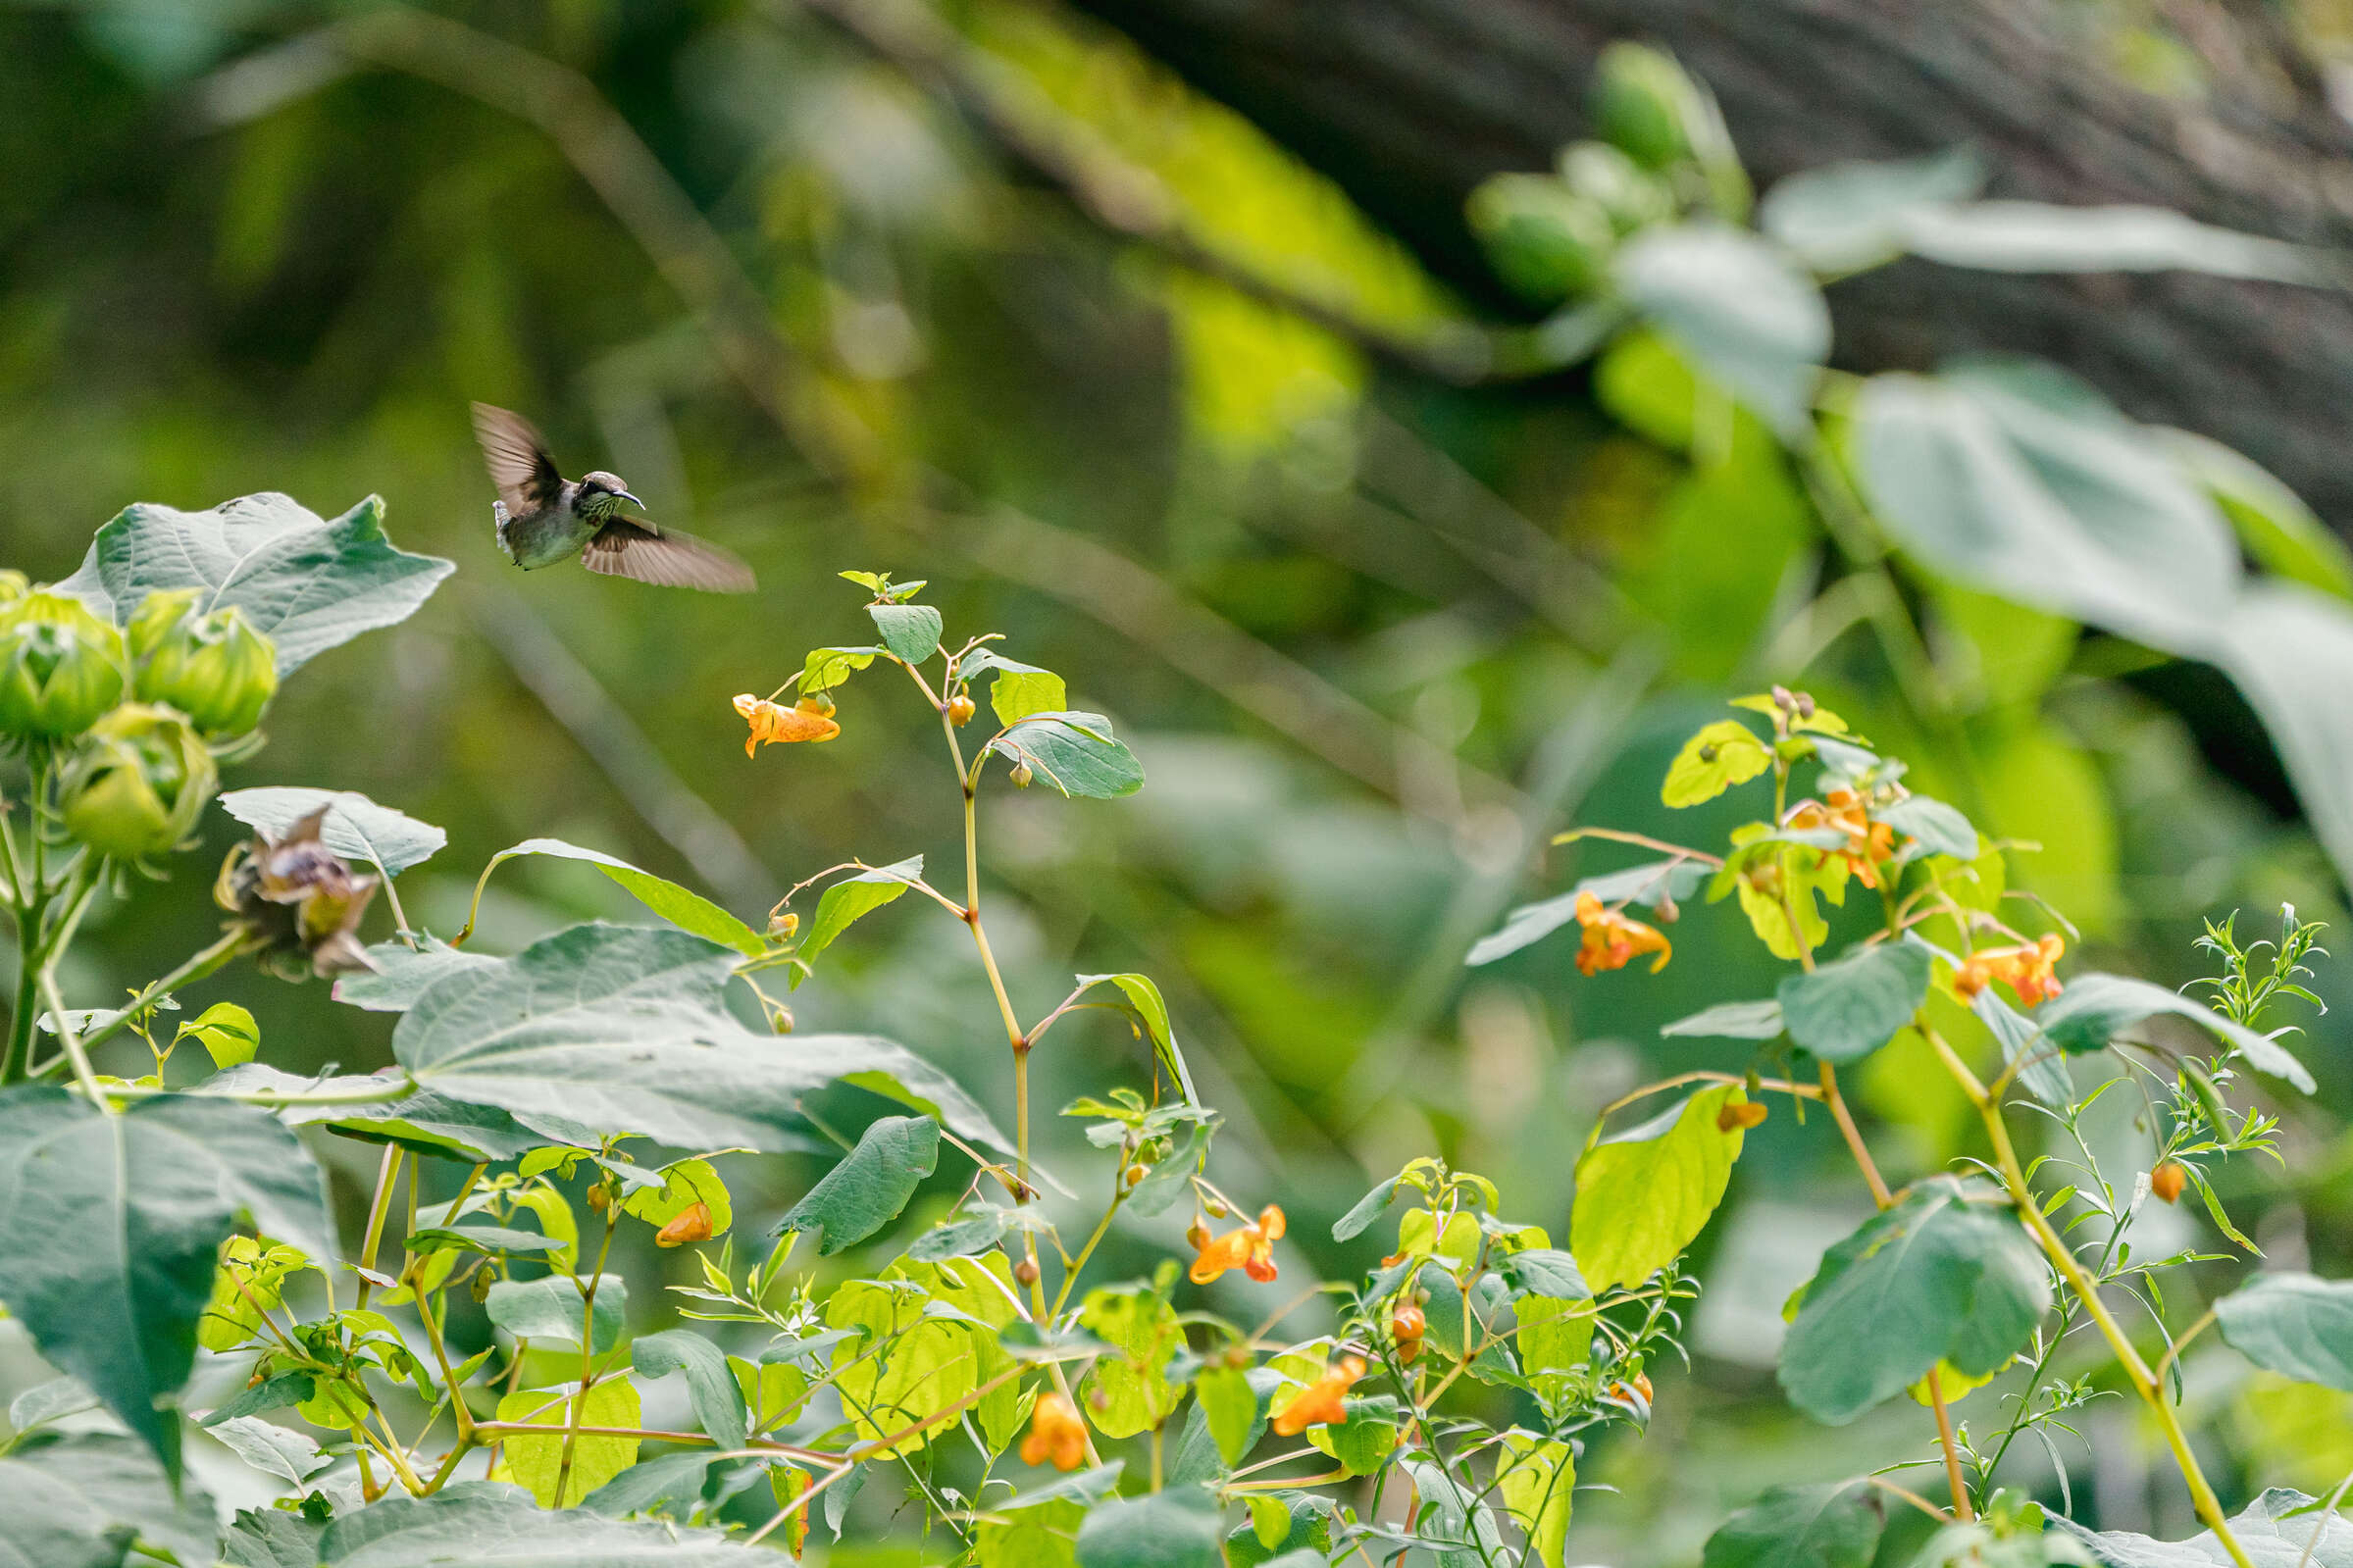 Hummingbirds hunt for nectar in a lush green setting